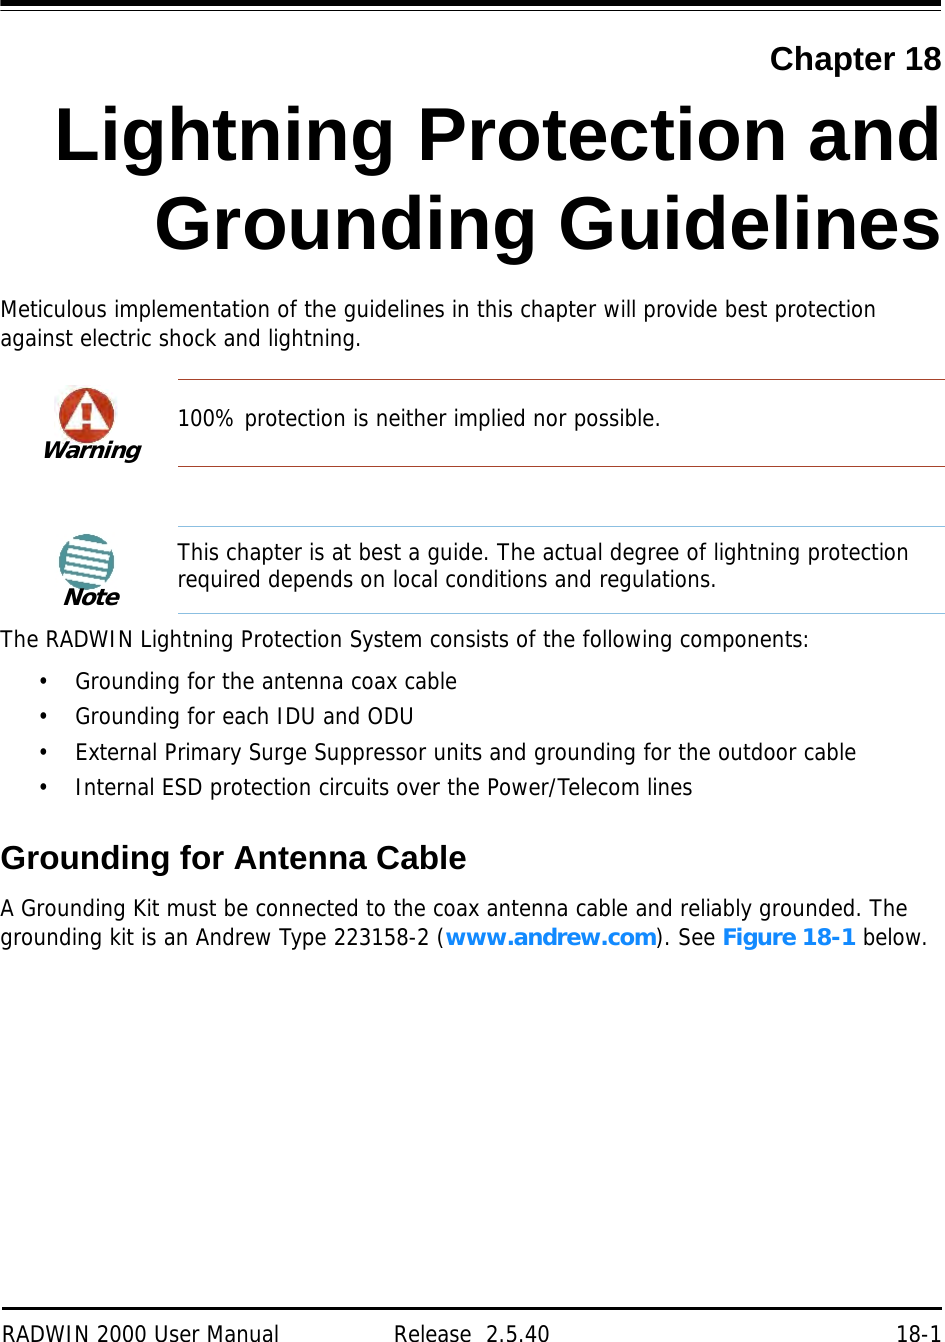 RADWIN 2000 User Manual Release  2.5.40 18-1Chapter 18Lightning Protection andGrounding GuidelinesMeticulous implementation of the guidelines in this chapter will provide best protection against electric shock and lightning.The RADWIN Lightning Protection System consists of the following components:• Grounding for the antenna coax cable• Grounding for each IDU and ODU• External Primary Surge Suppressor units and grounding for the outdoor cable• Internal ESD protection circuits over the Power/Telecom linesGrounding for Antenna CableA Grounding Kit must be connected to the coax antenna cable and reliably grounded. The grounding kit is an Andrew Type 223158-2 (www.andrew.com). See Figure 18-1 below.Warning100% protection is neither implied nor possible.NoteThis chapter is at best a guide. The actual degree of lightning protection required depends on local conditions and regulations.